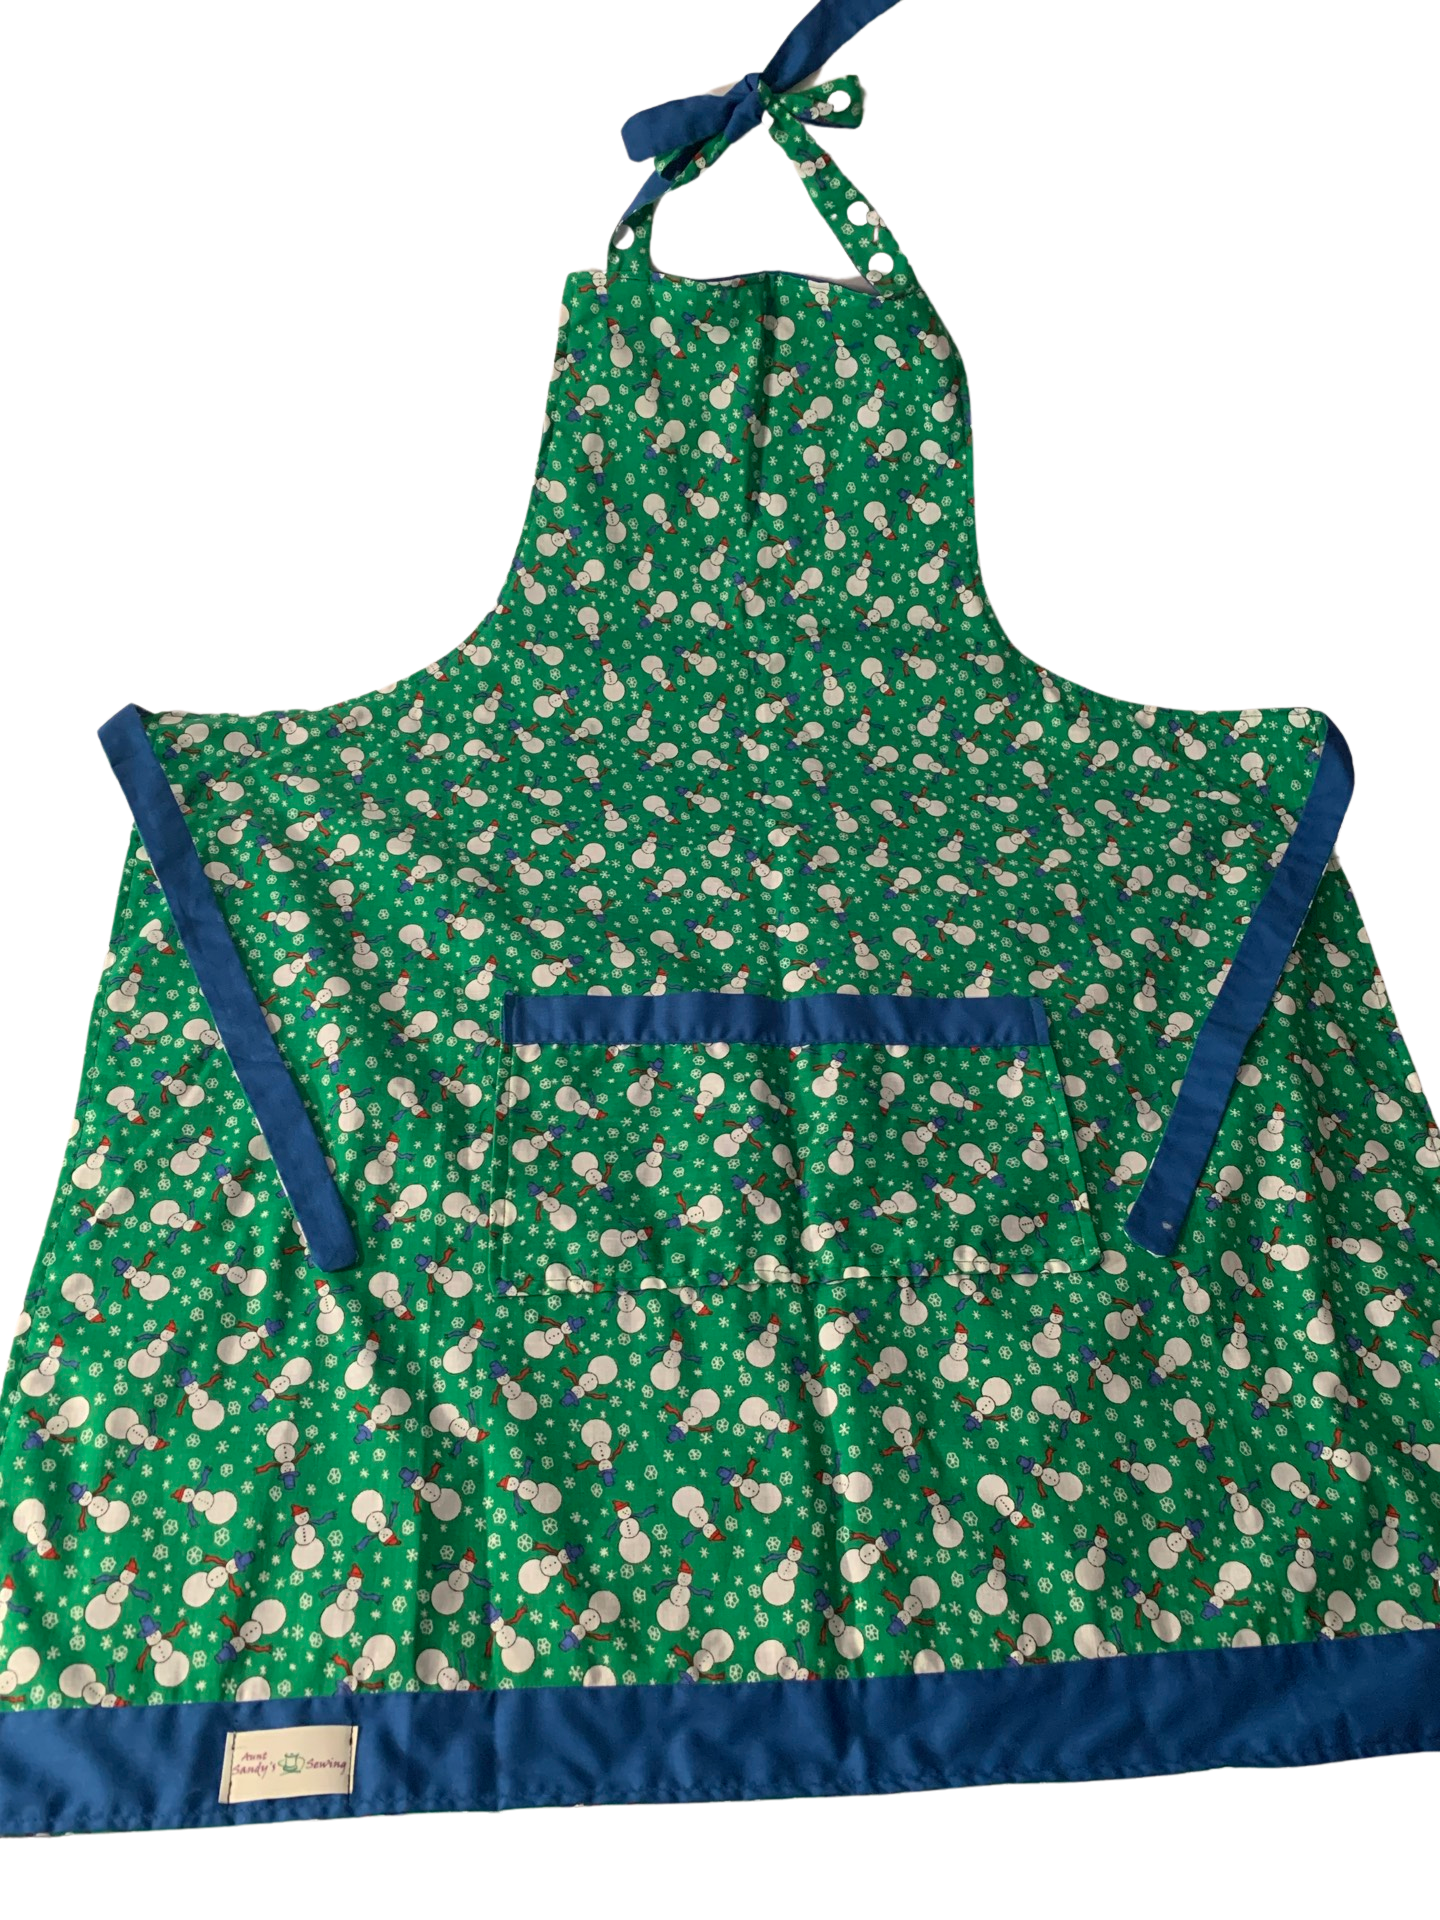 Adult Reversible Christmas Apron. Fun snowman print with blue on reverse side. Large pockets on both sides. Washable